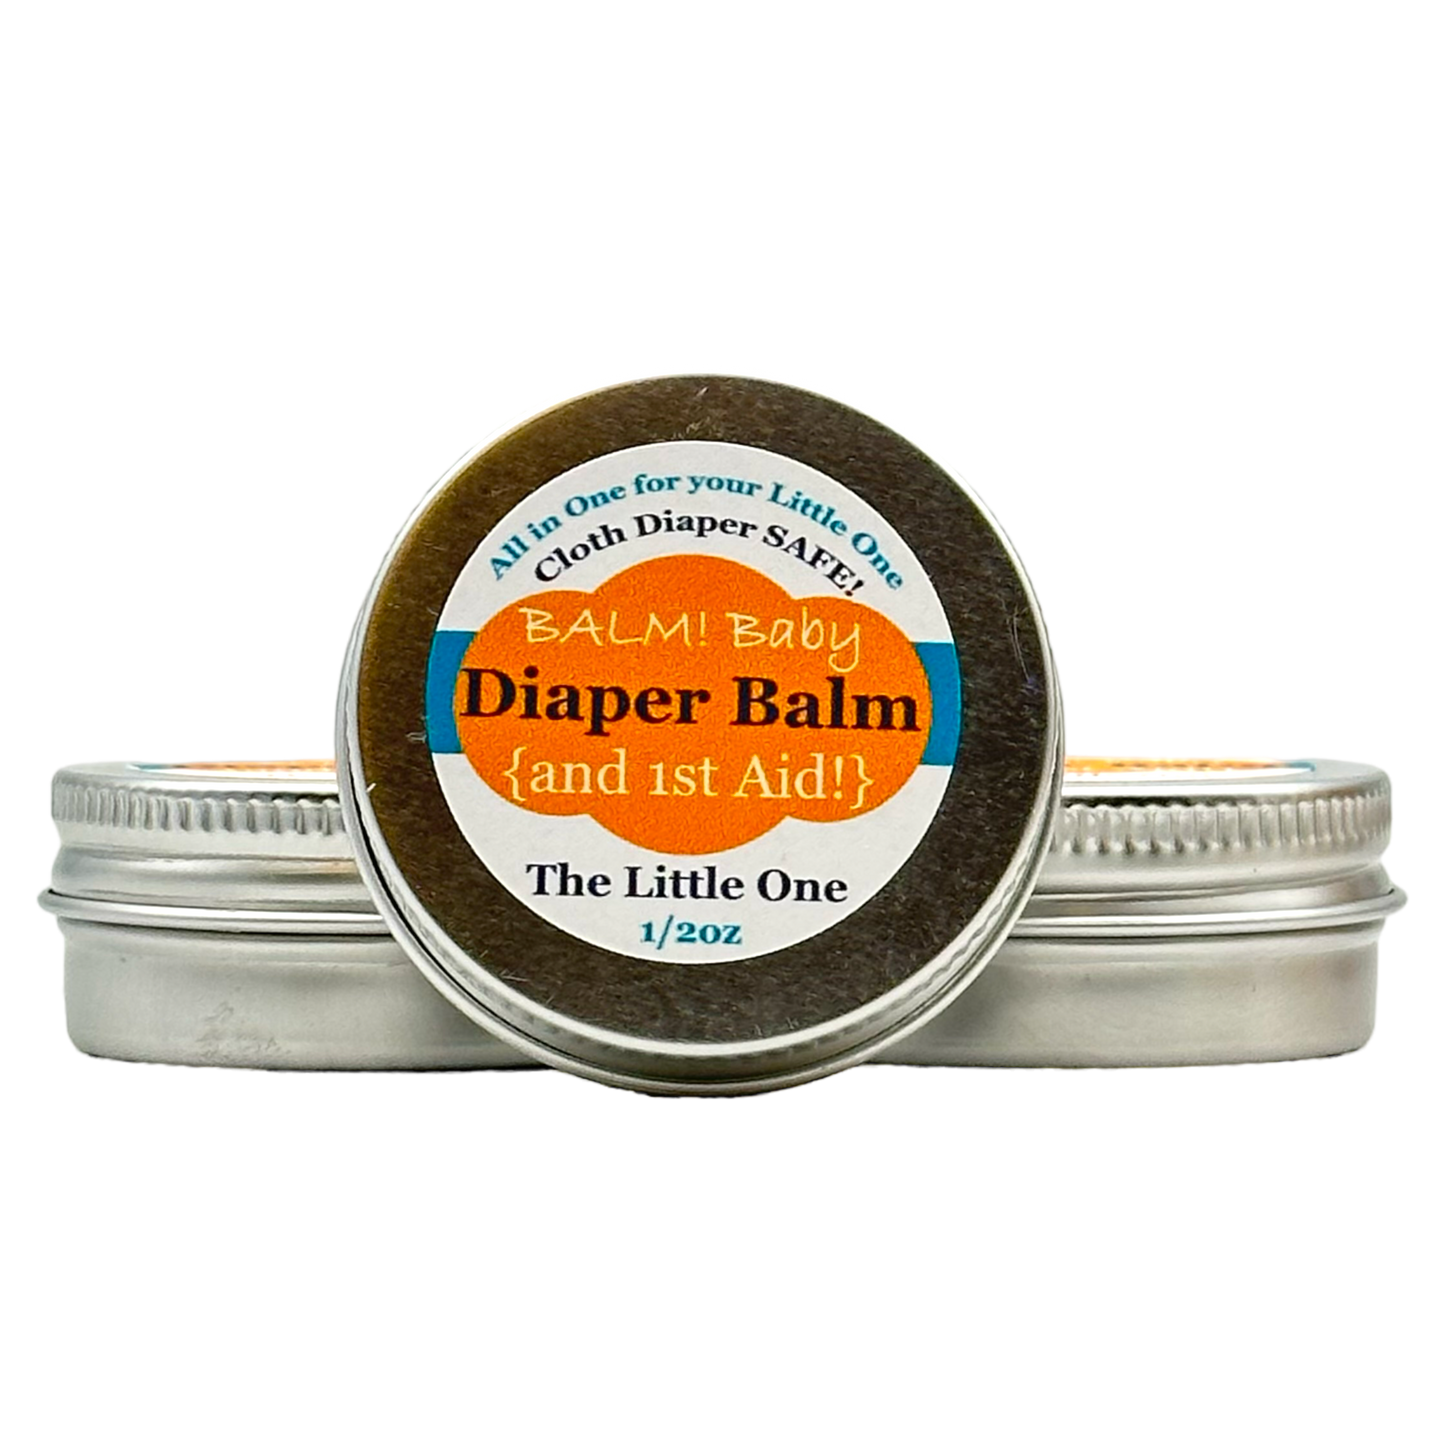 BALM! Baby - Diaper Balm and ALLpurpose skin aid travel tin (the little one-travel size)